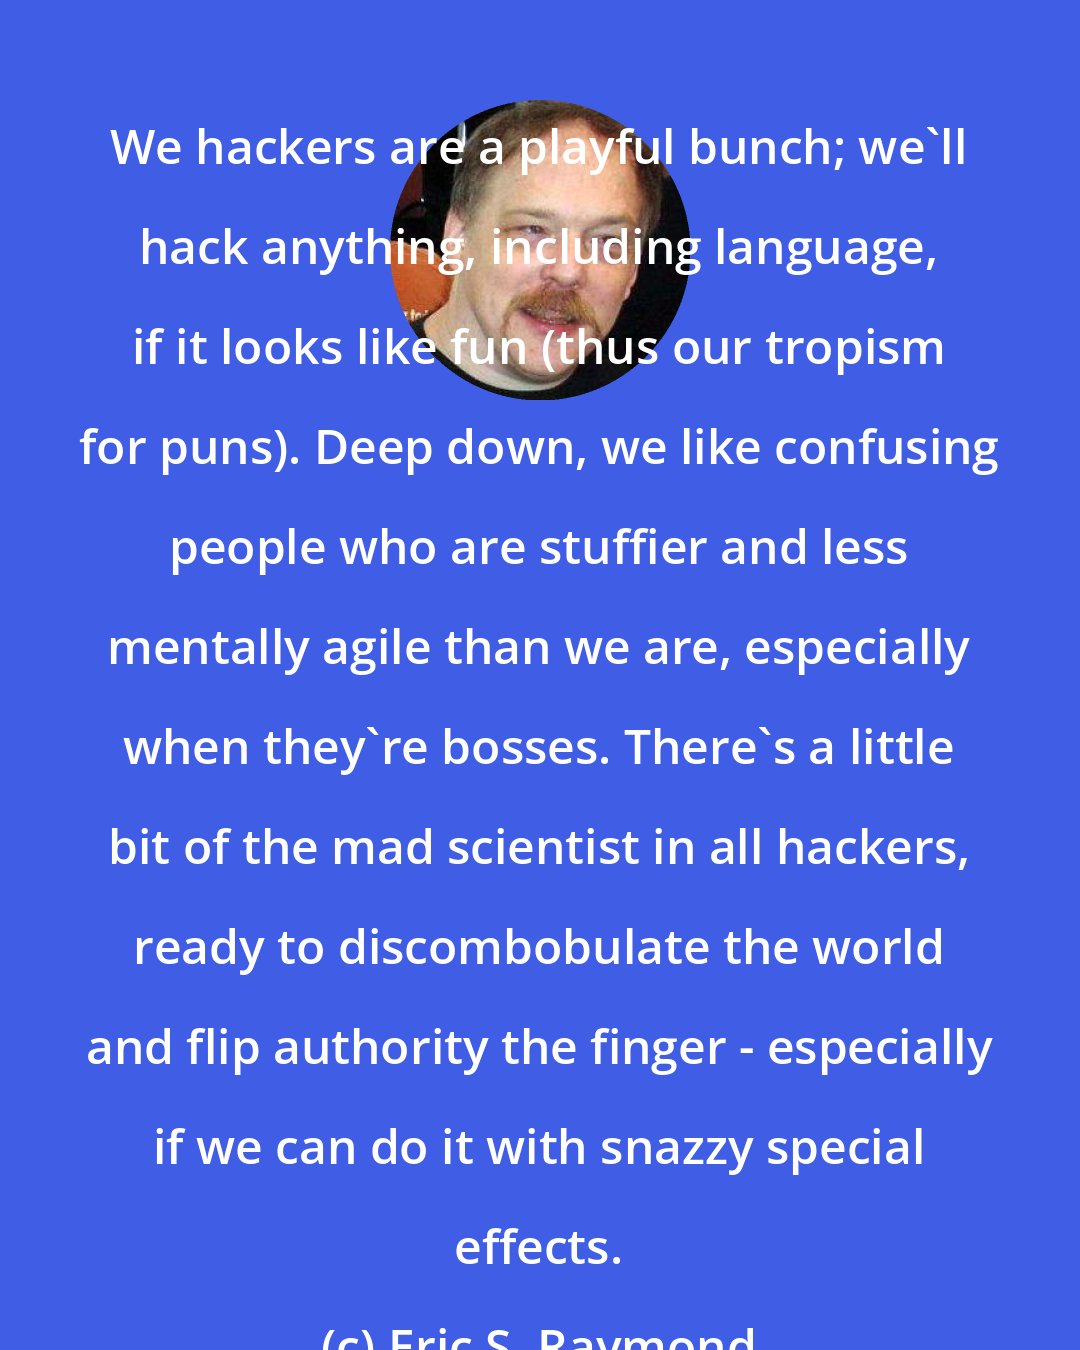 Eric S. Raymond: We hackers are a playful bunch; we'll hack anything, including language, if it looks like fun (thus our tropism for puns). Deep down, we like confusing people who are stuffier and less mentally agile than we are, especially when they're bosses. There's a little bit of the mad scientist in all hackers, ready to discombobulate the world and flip authority the finger - especially if we can do it with snazzy special effects.